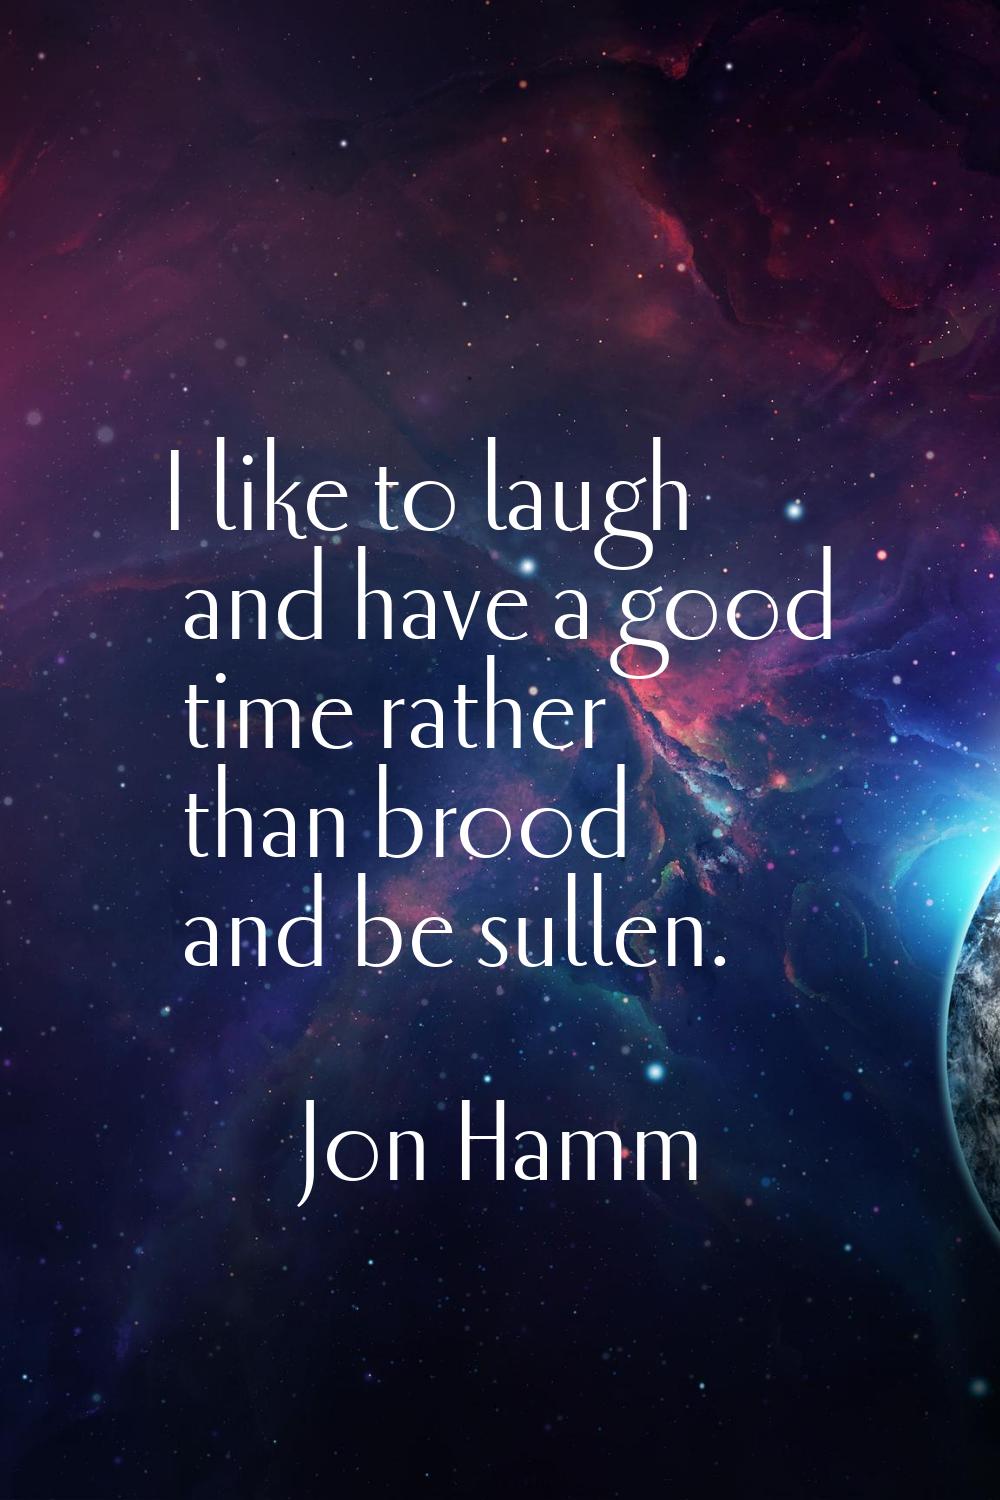 I like to laugh and have a good time rather than brood and be sullen.